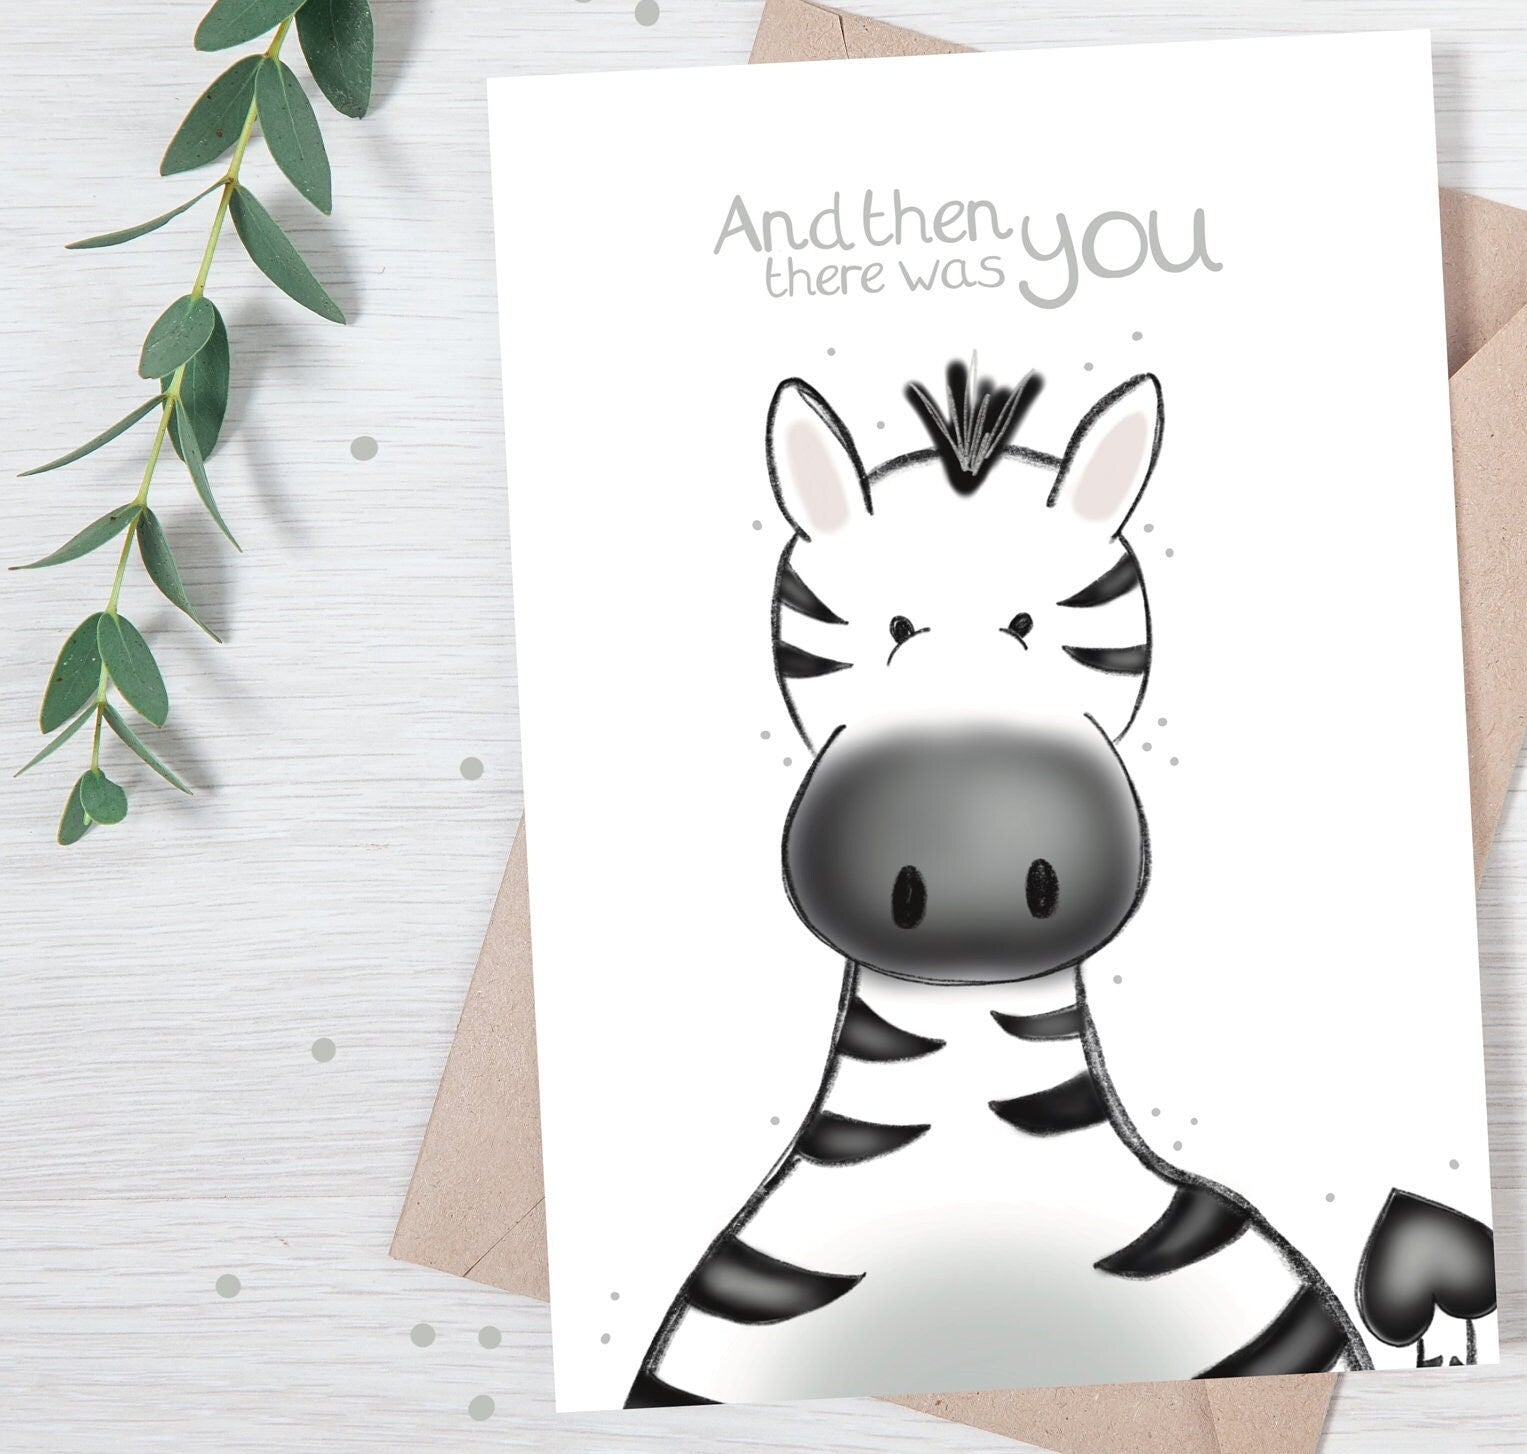 luxury new baby baby shower greetings card with a safari theme baby zebra popping up from the bottom with the title &quote "and then there was you" on a white background, with a kraft envelope